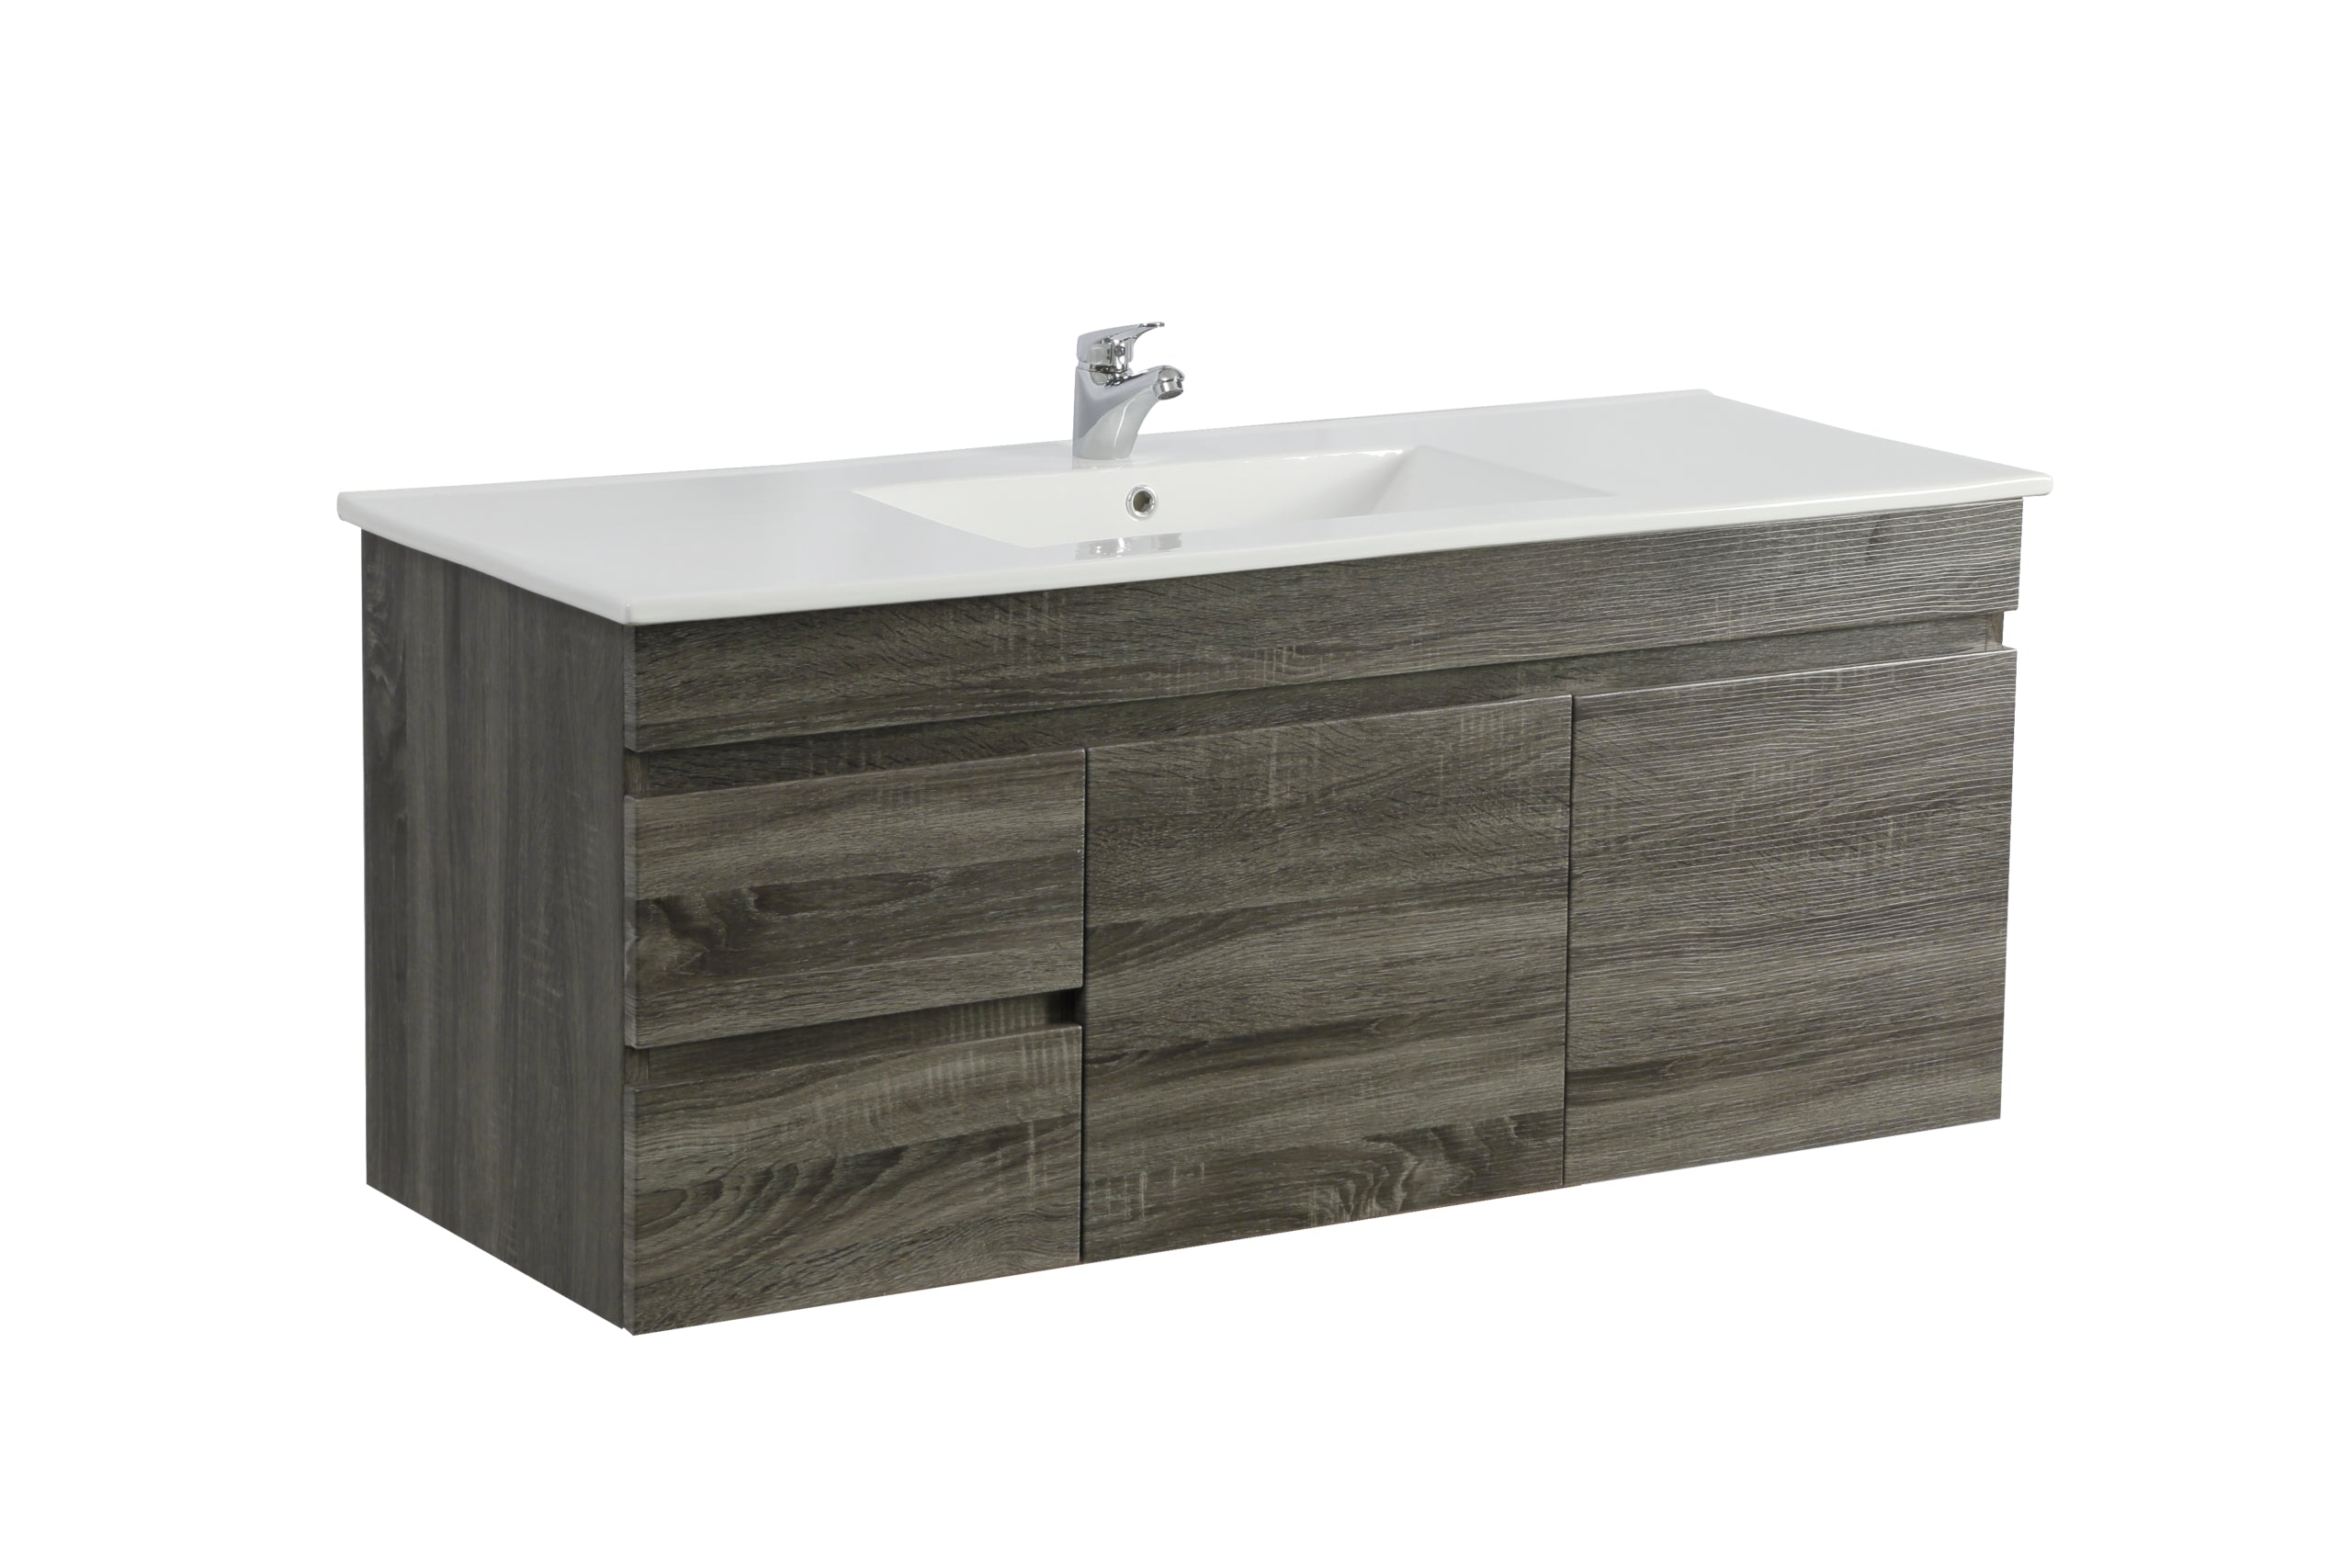 POSEIDON BERGE DARK GREY WOOD GRAIN 1200MM WALL HUNG VANITY (AVAILABLE IN LEFT HAND DRAWER AND RIGHT HAND DRAWER)